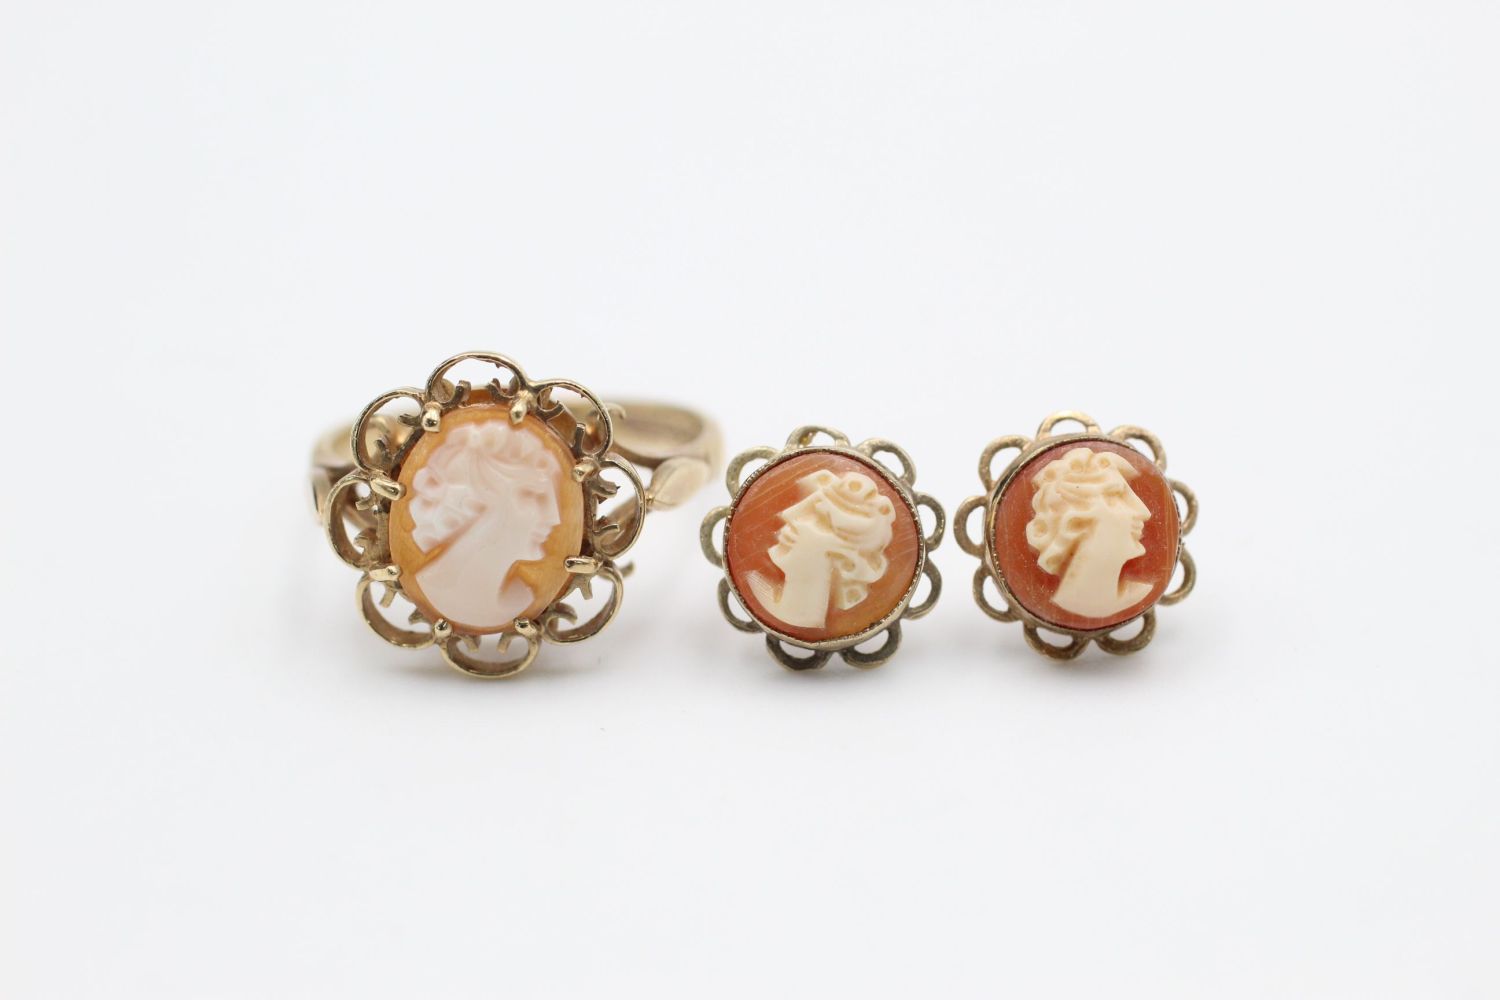 2 x 9ct gold cameo ring and stud earrings 4.2 grams gross